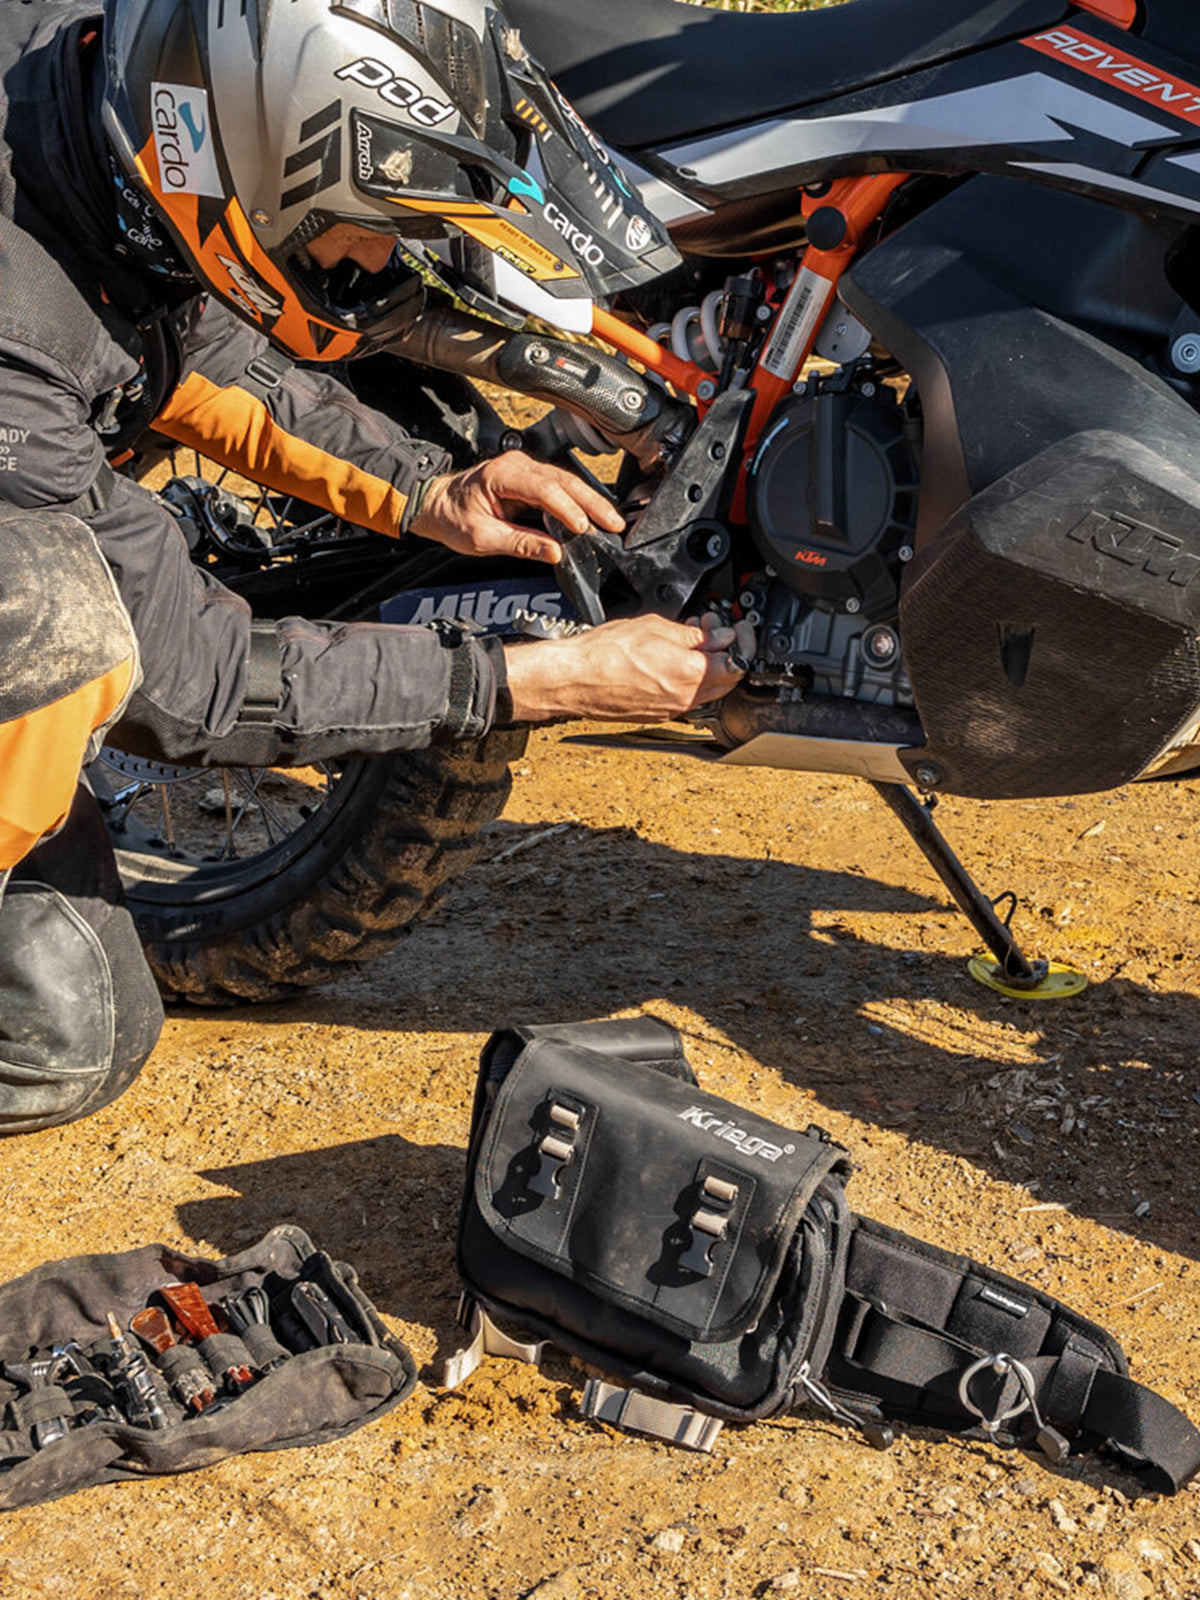 motorbike rider fixing his bike with the Kriega R8 Waist Pack on the ground